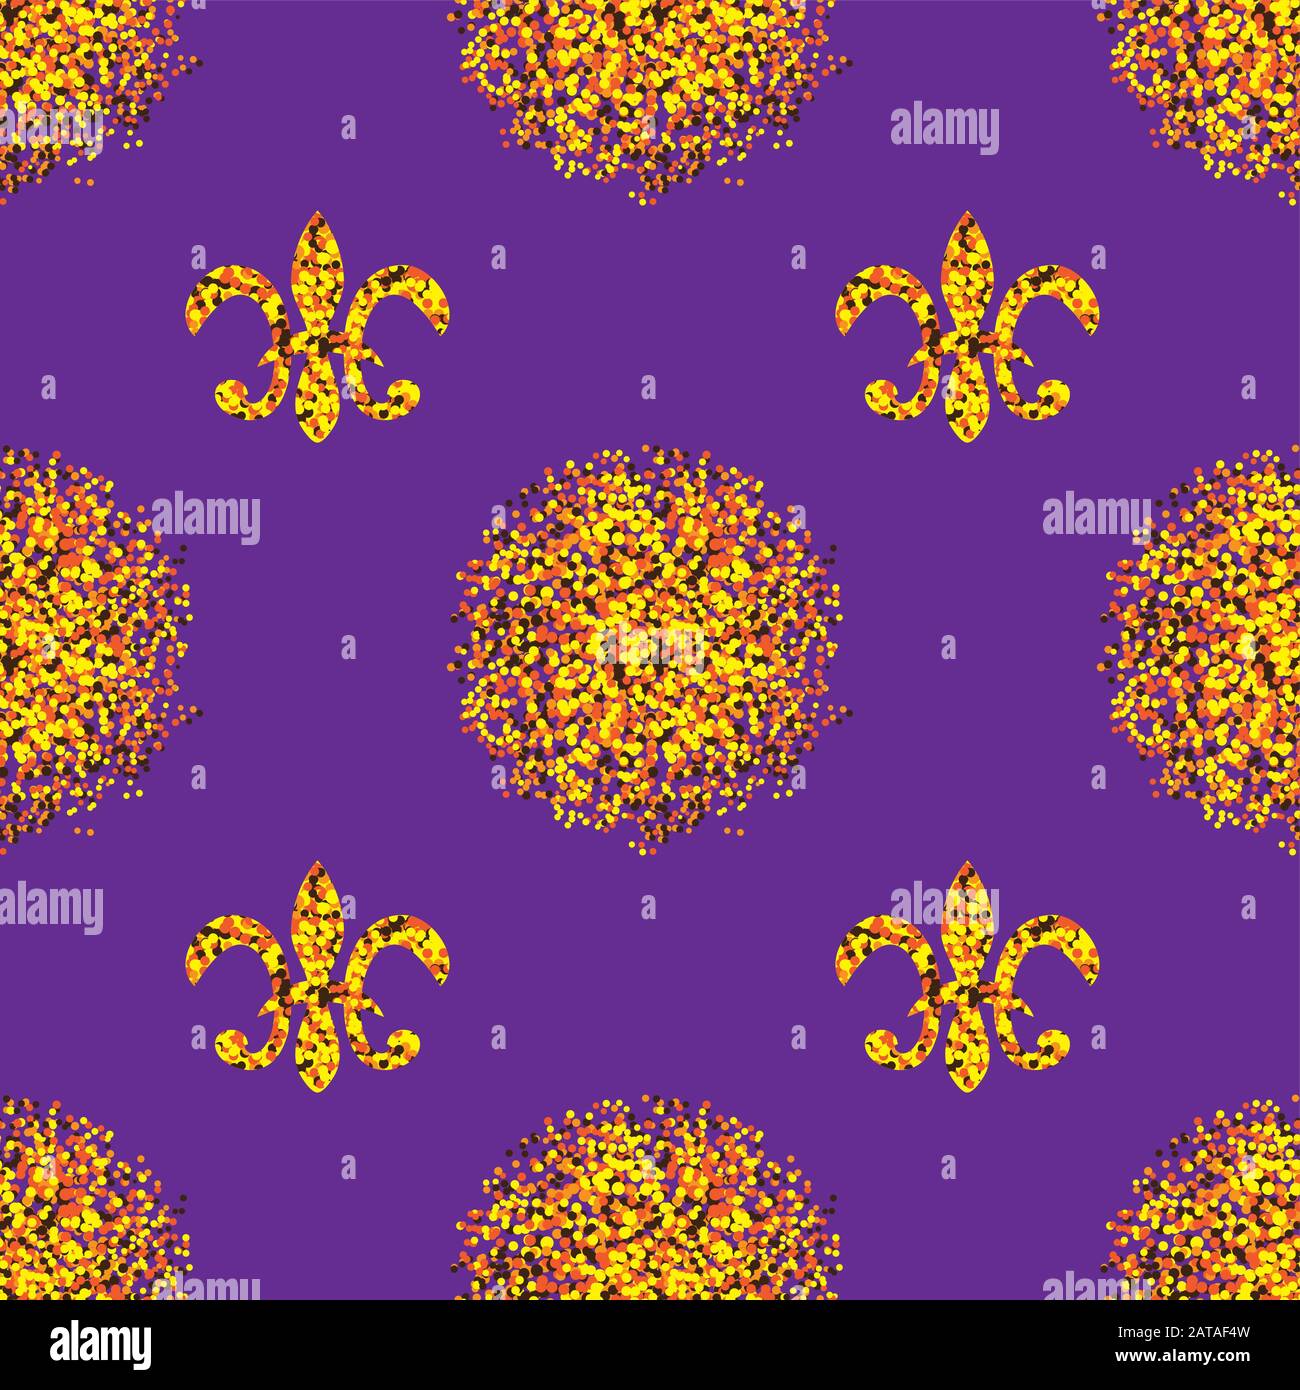 Seamless pattern of heraldic knight s Lily confetti on a purple background. Vector image Stock Vector